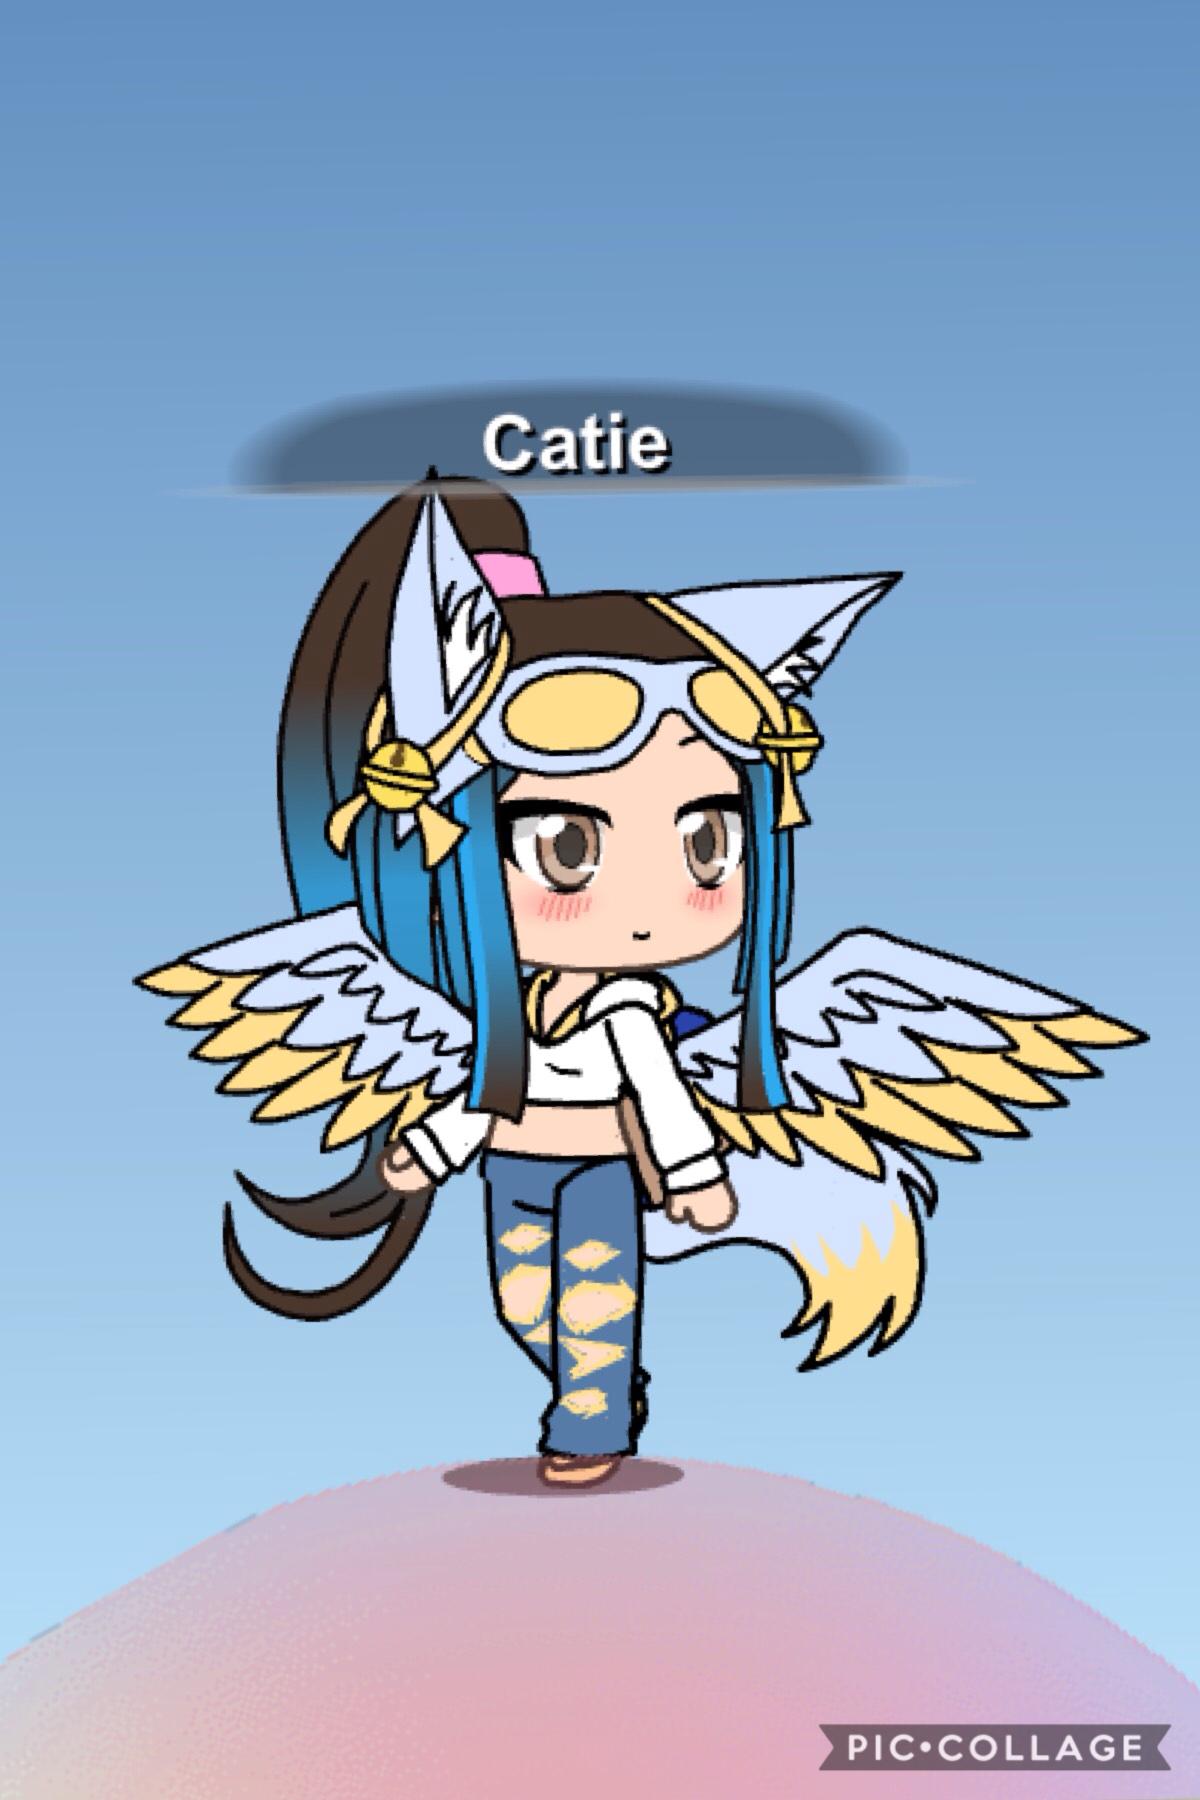 This is catie, I couldn't put both wolf ears and a halo, sorry😕